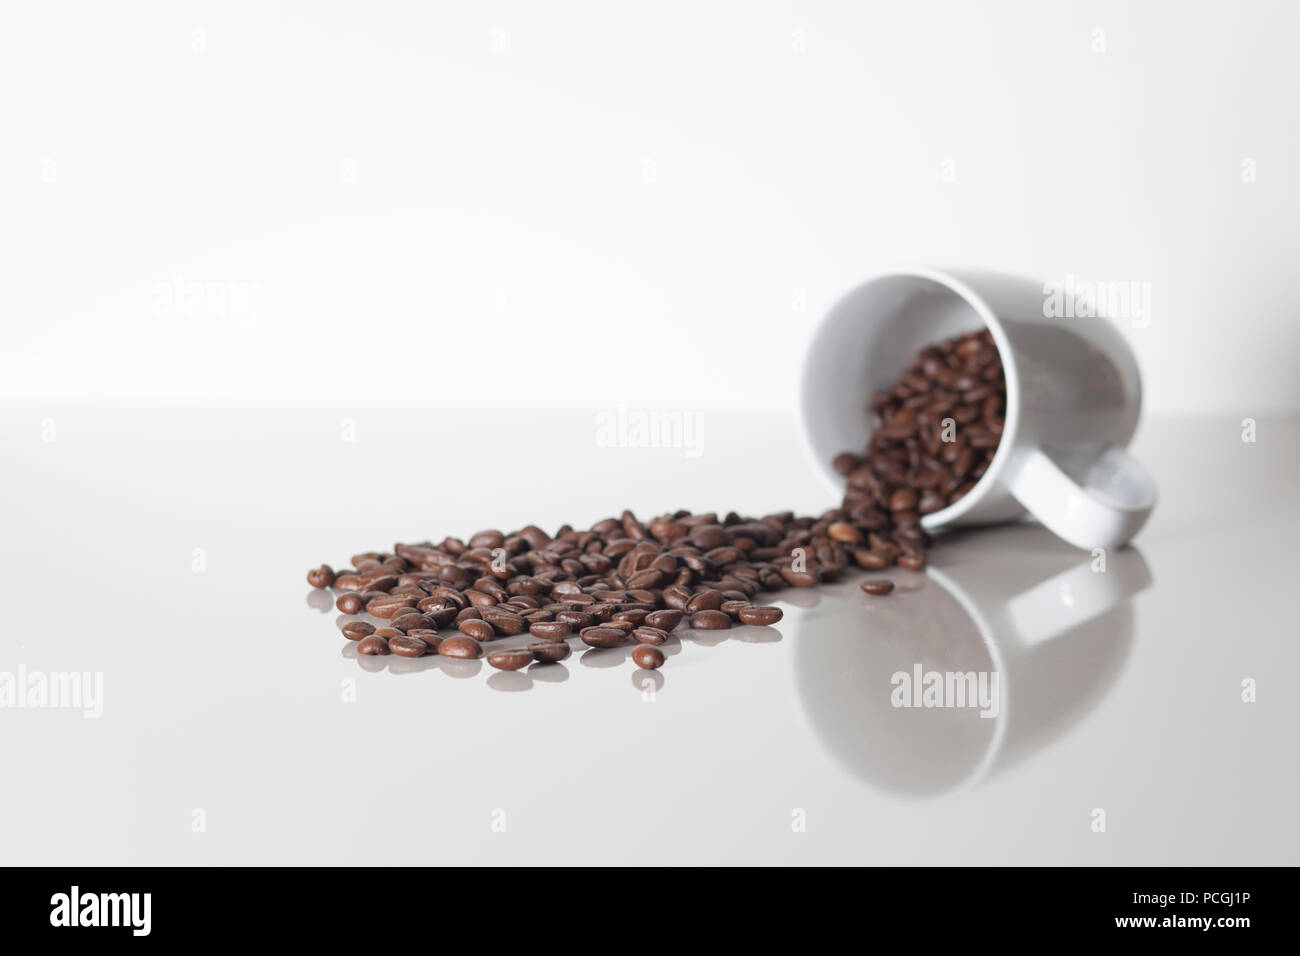 Many coffee coffee beans spilling out of a cup on a white counterspace with textspace and a reflection Stock Photo